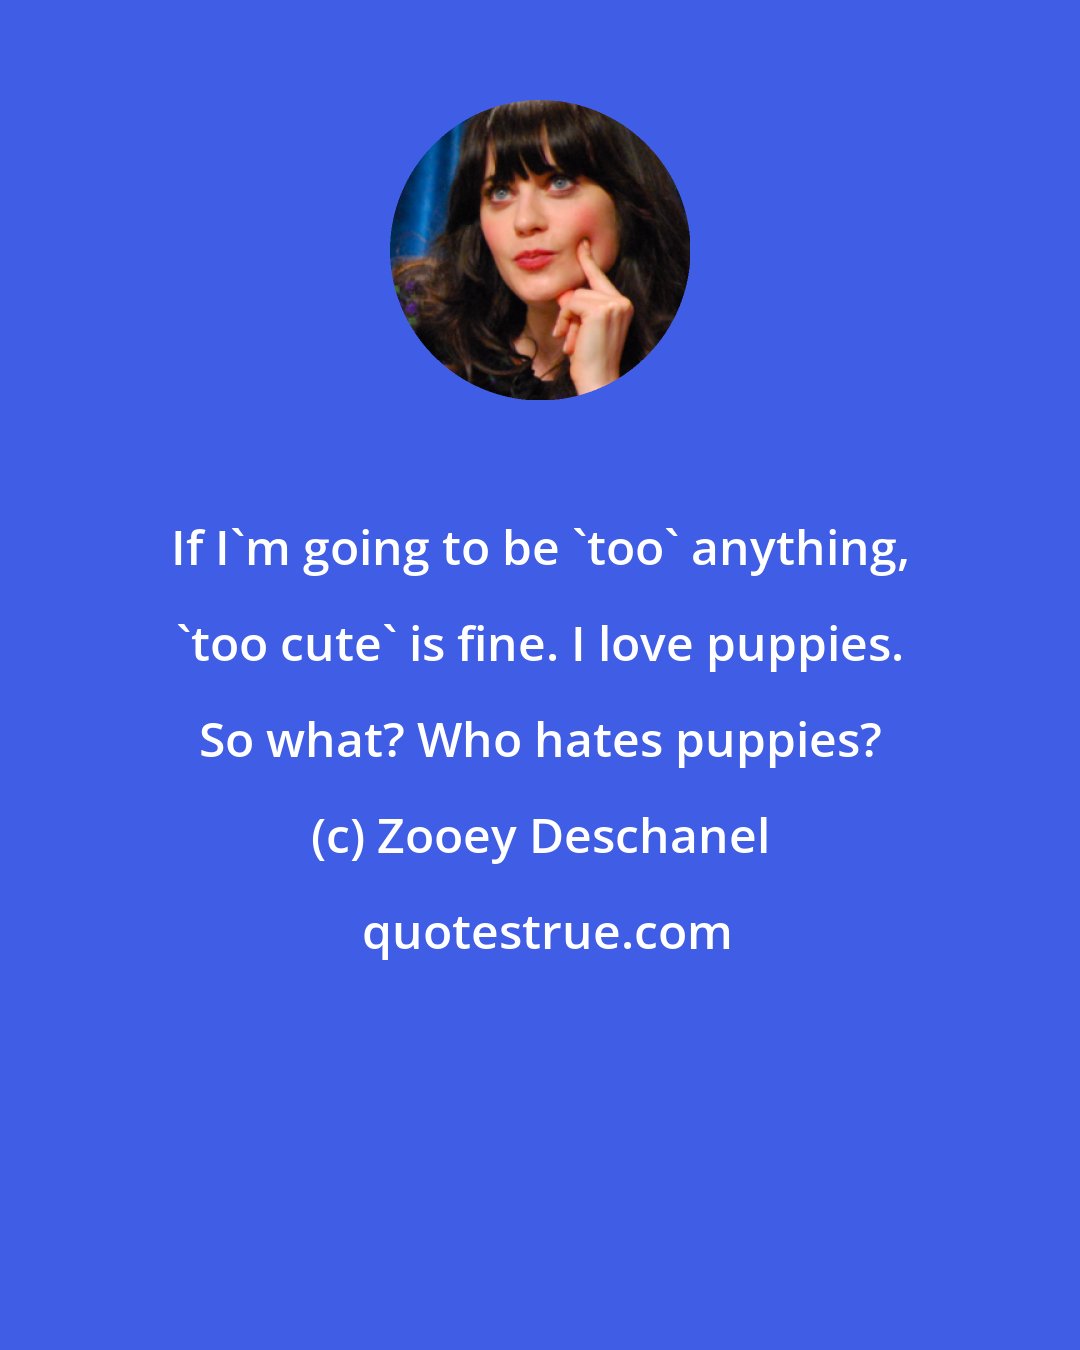 Zooey Deschanel: If I'm going to be 'too' anything, 'too cute' is fine. I love puppies. So what? Who hates puppies?